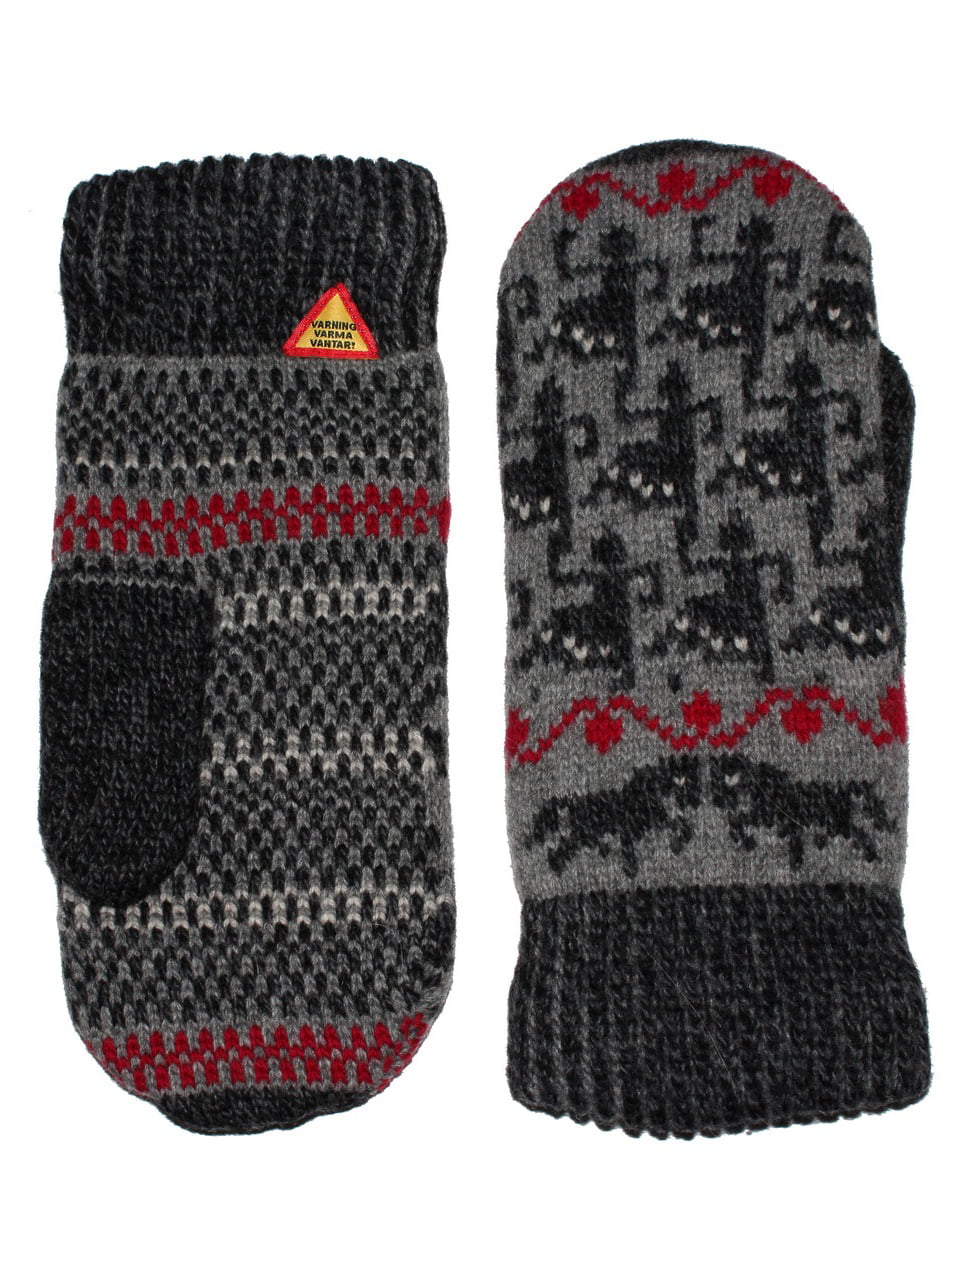 as Featured by the Raynauds Assn Öjbro Swedish made 100% Merino Wool Soft Thick & Extremely Warm Mittens 